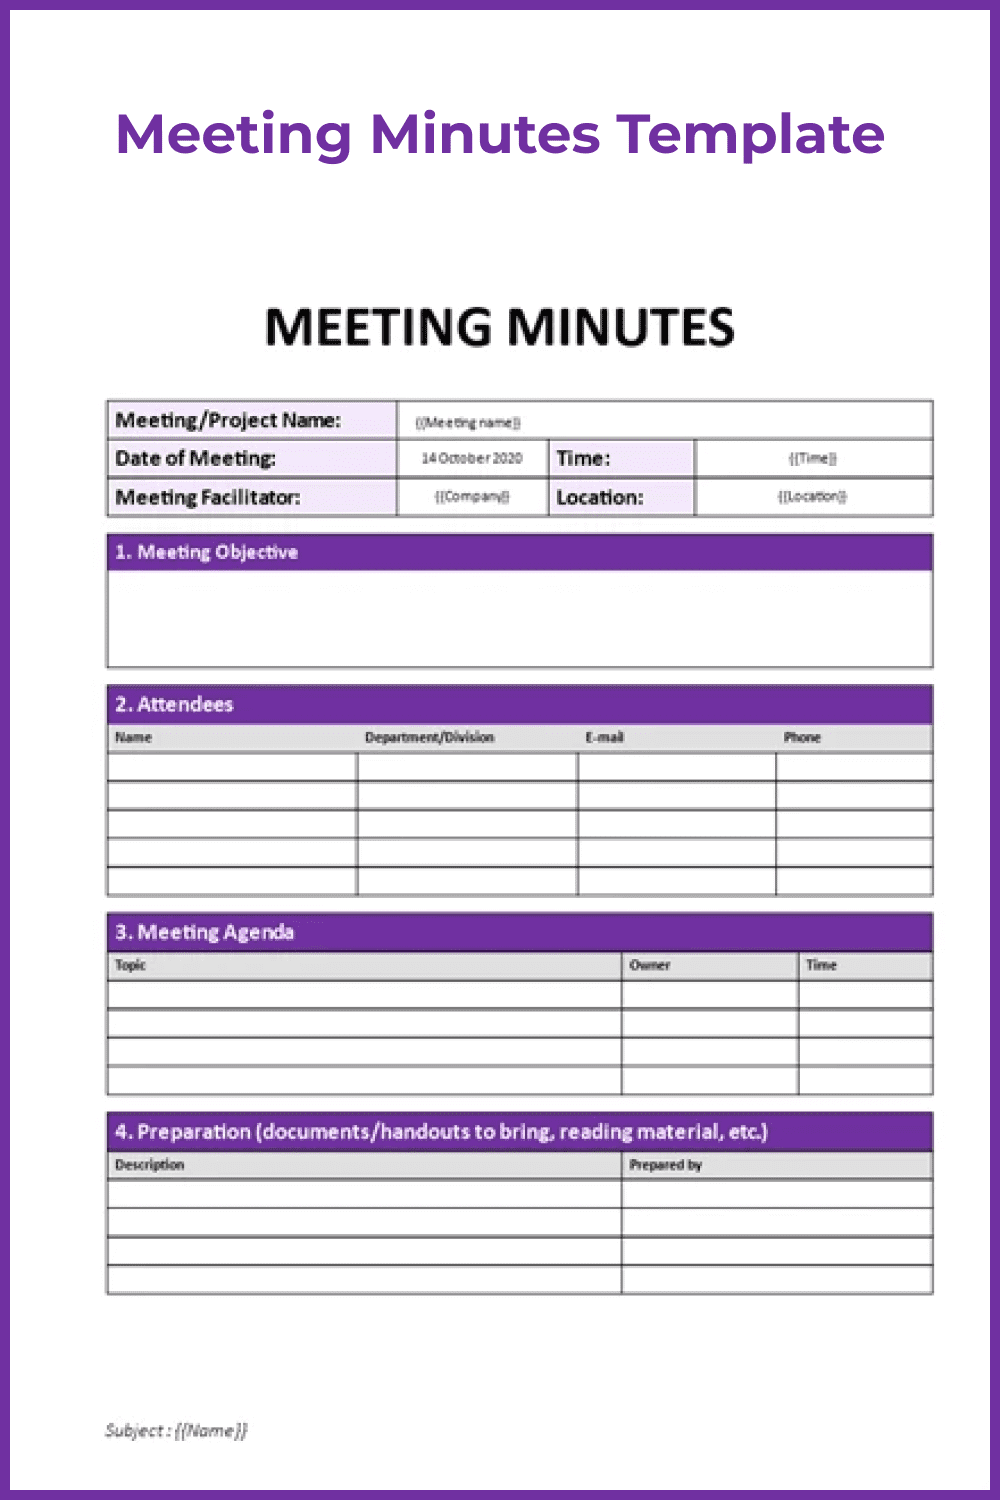 15-best-meeting-minutes-templates-to-save-time-riset